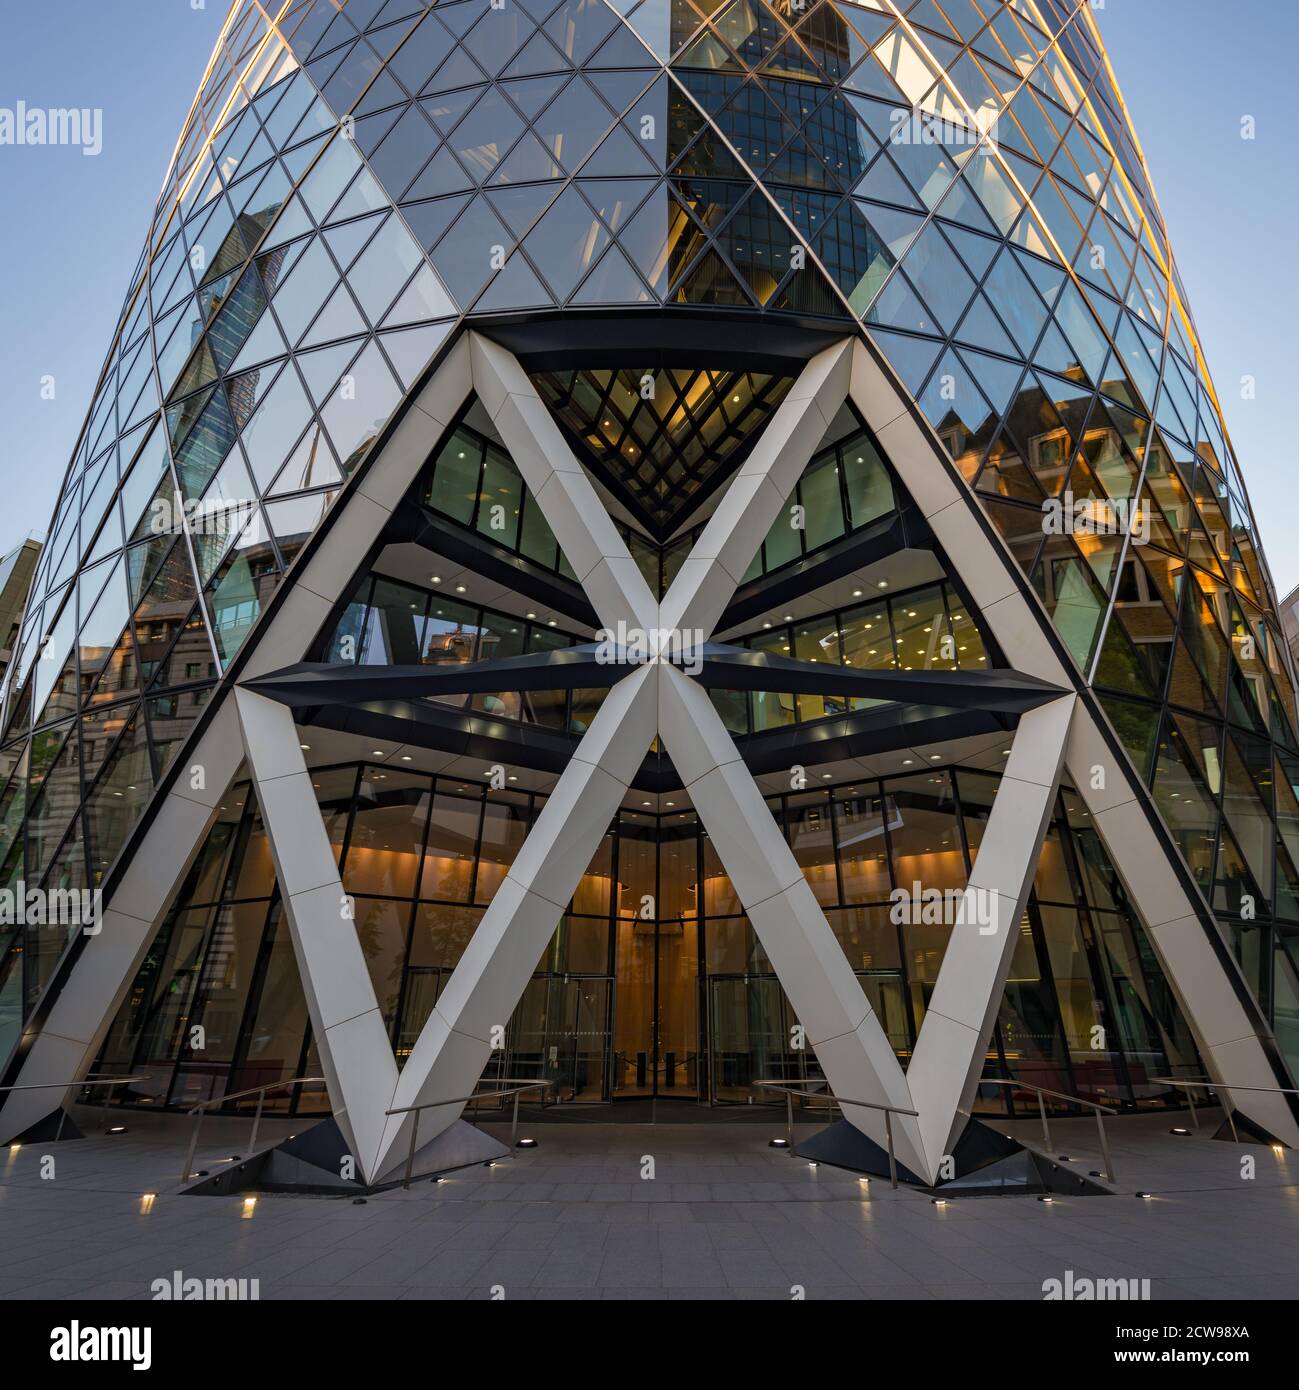 Exterior of the Gherkin, City of London, London, United Kingdom Stock Photo